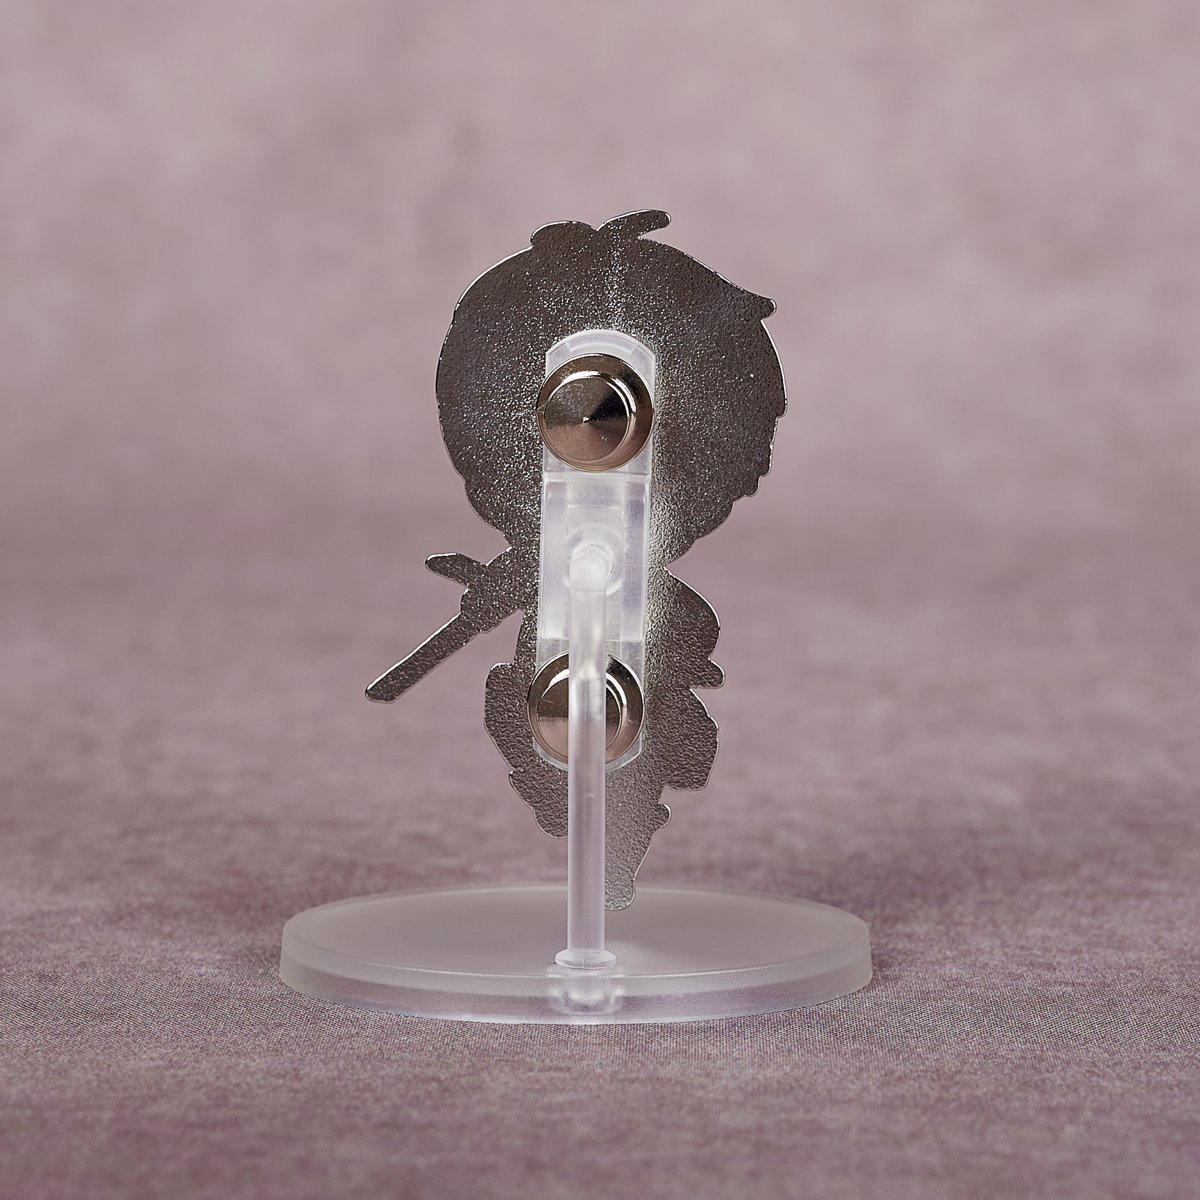 Eren Yeager Attack on Titan Nendoroid Pin image count 2